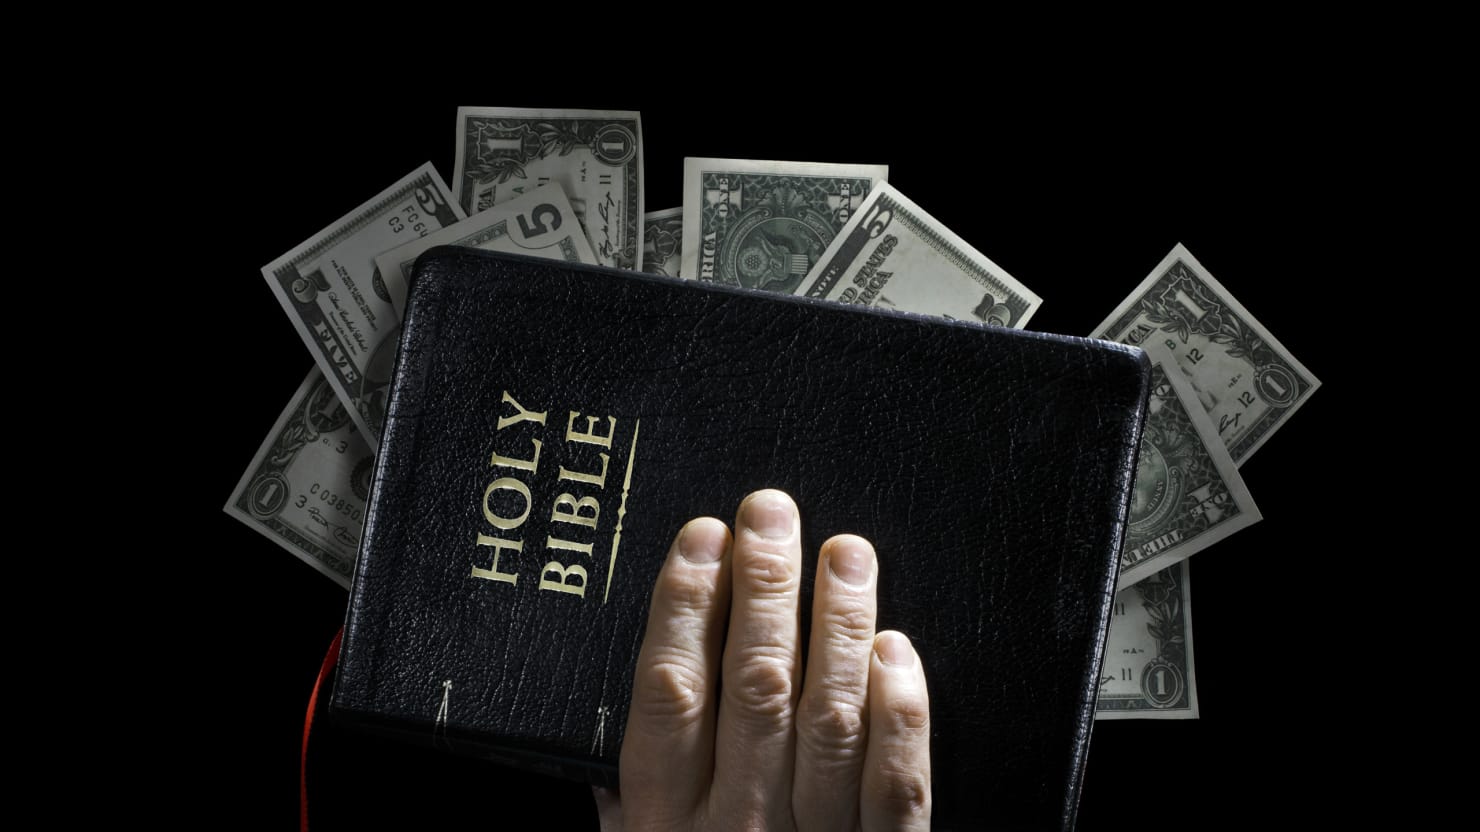 What's Religious About Corporate America Cheating Workers?